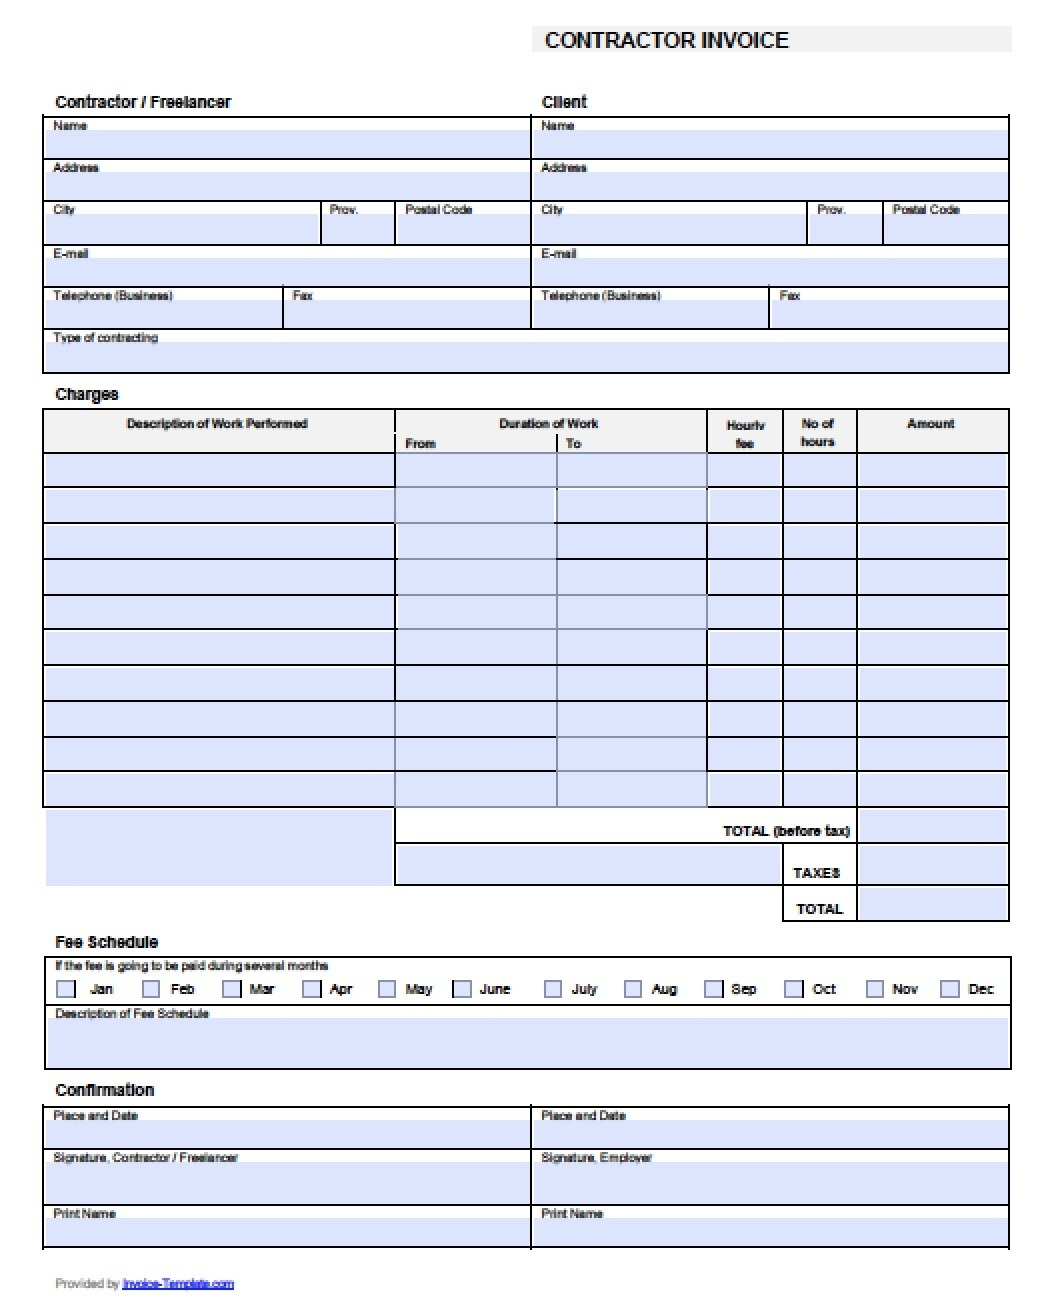 making quick invoice for contract labor